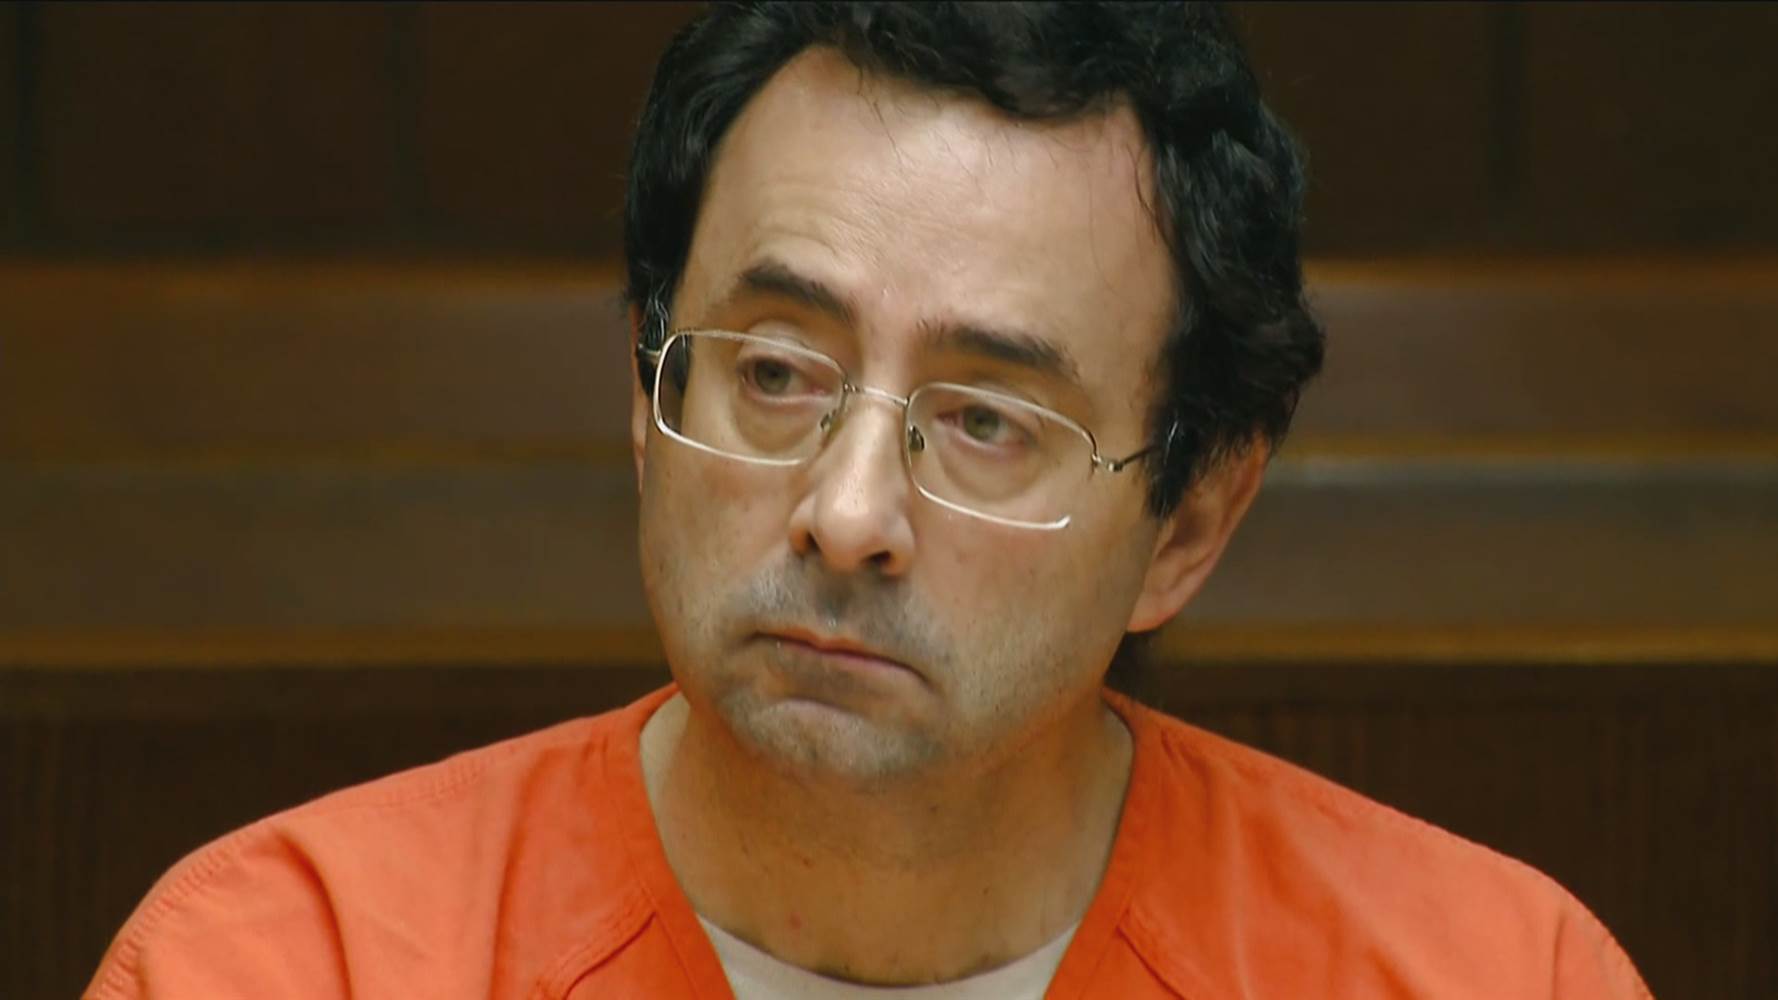 Nassar Sentenced to Up to 175 Years in Prison for Criminal Sexual Abuse